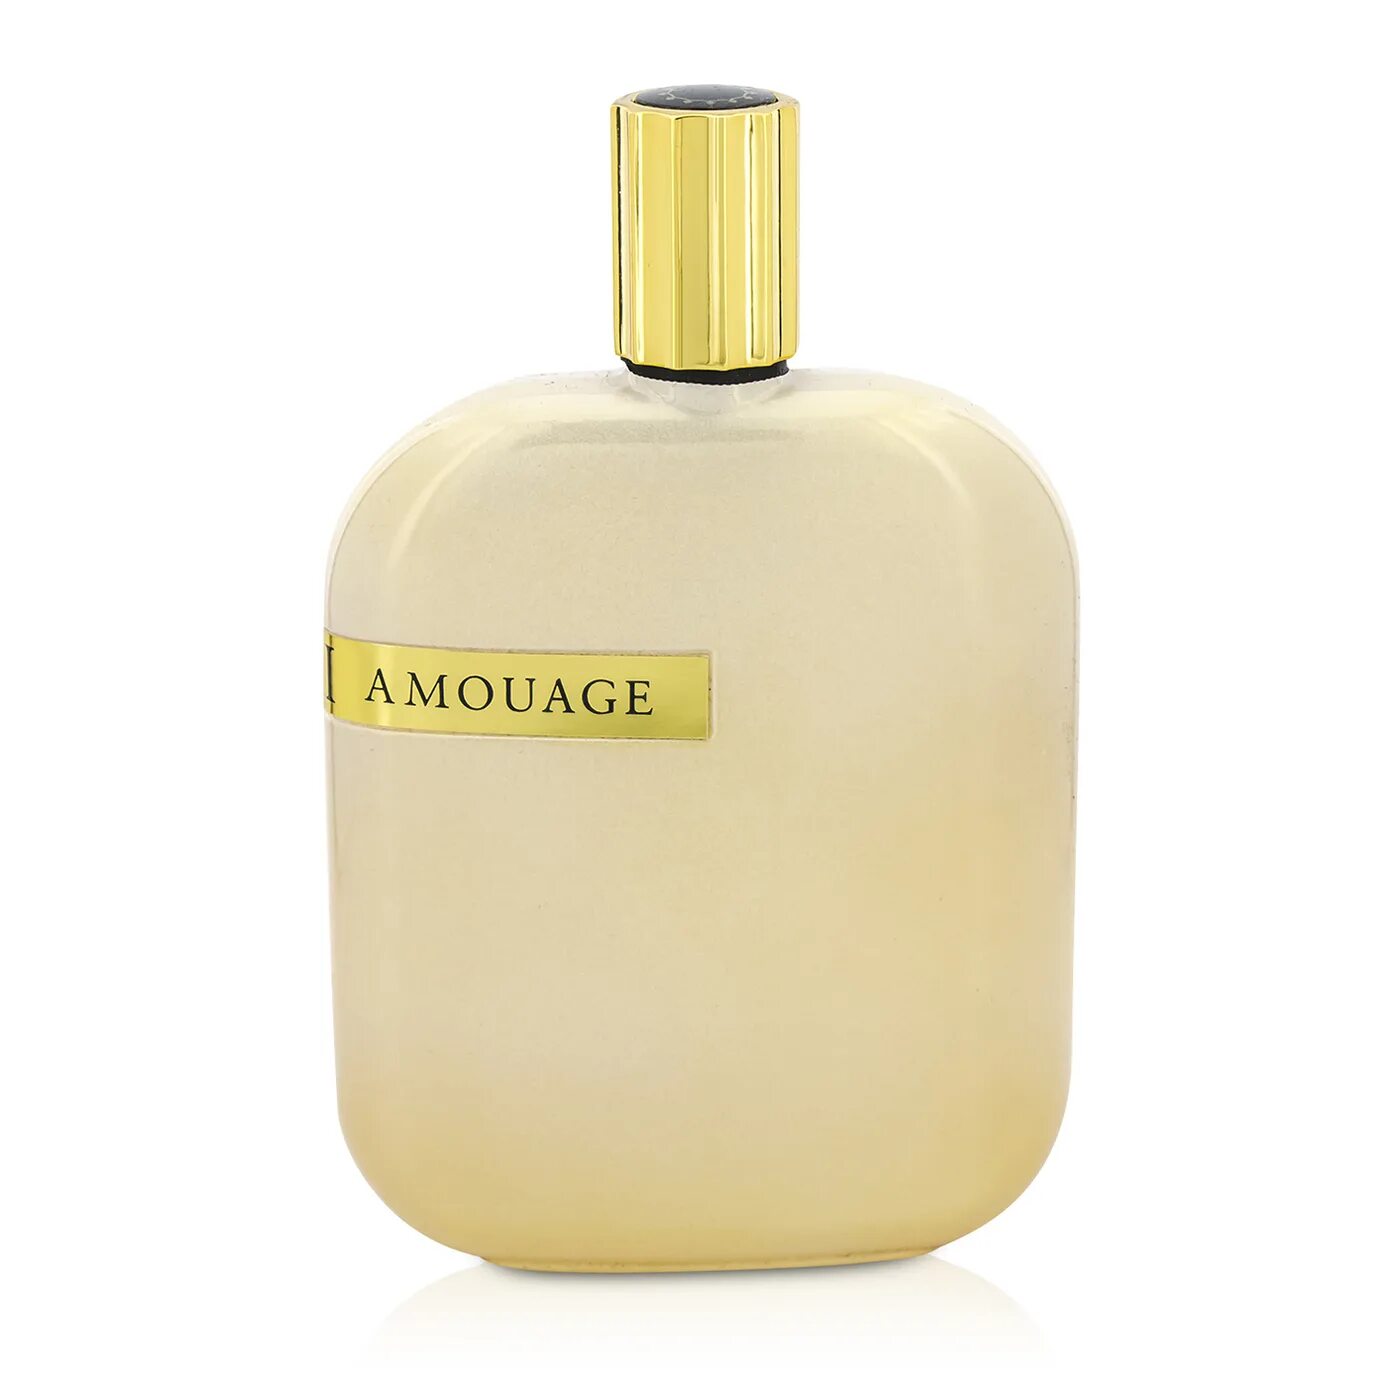 Amouage opus v. Amouage Library collection Opus v 100ml. Amouage Opus 5. Amouage Opus VII 50 мл. Amouage Opus 8.